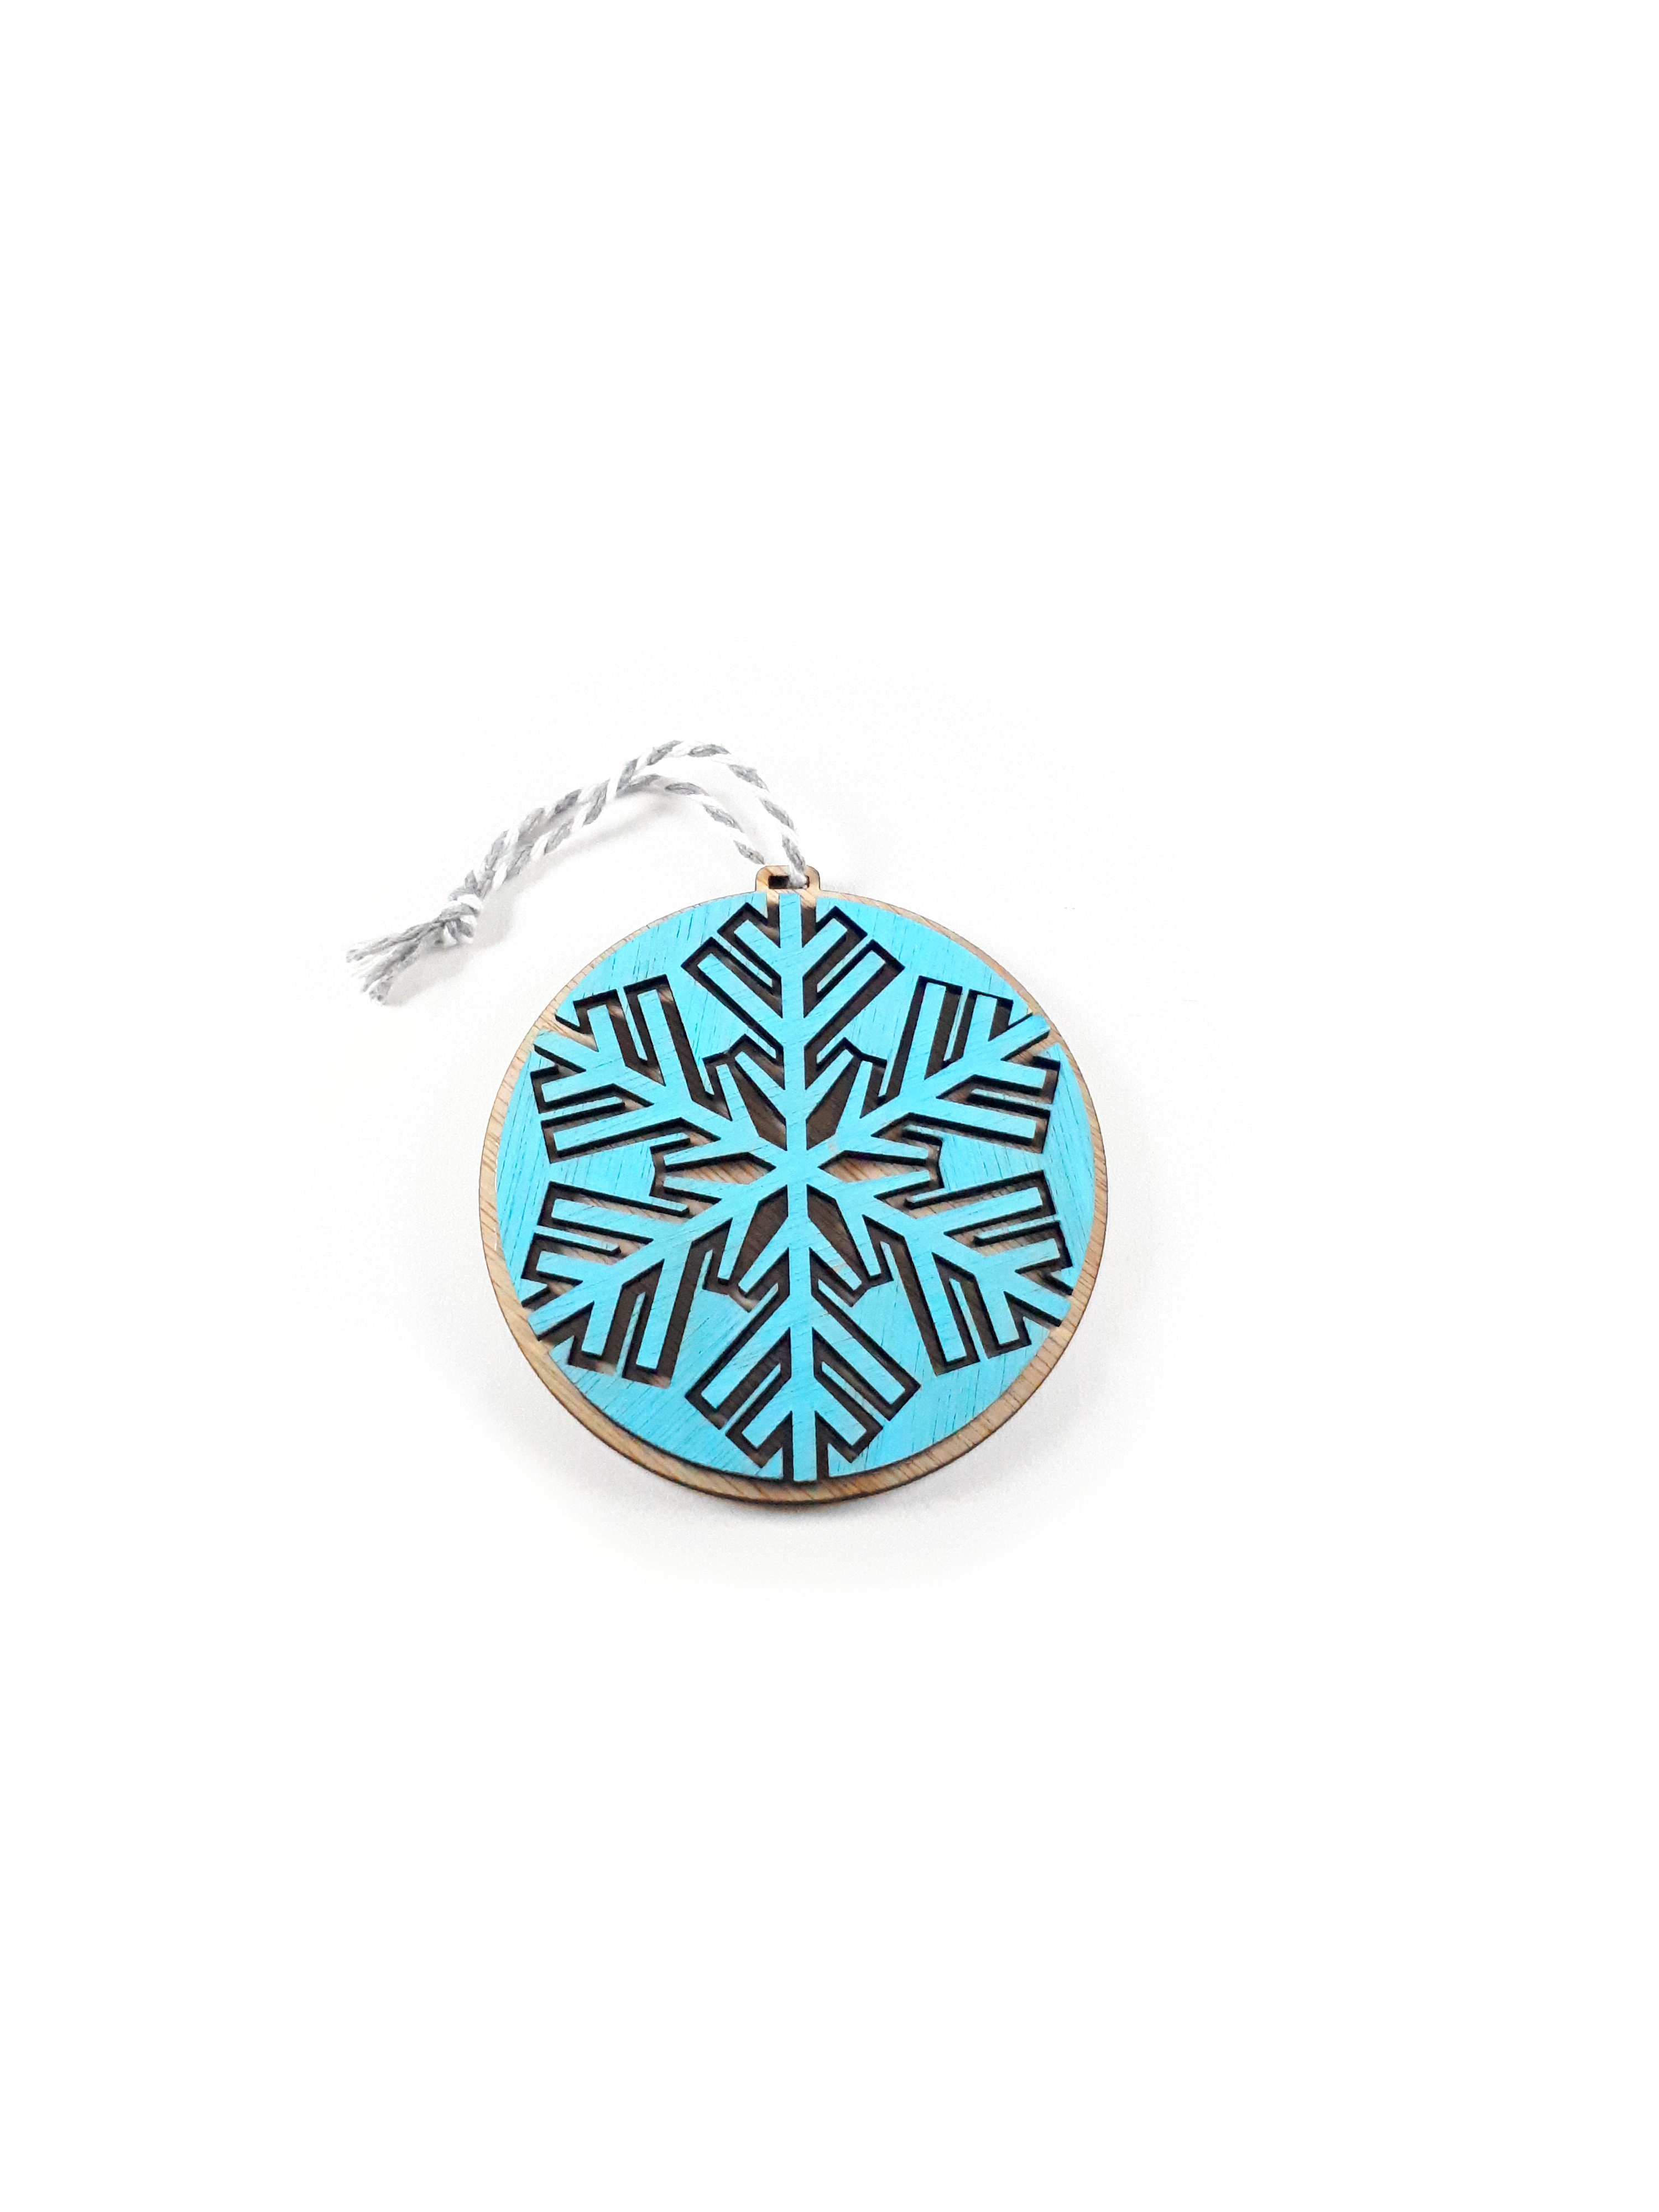 Painted Snowflake Baubles